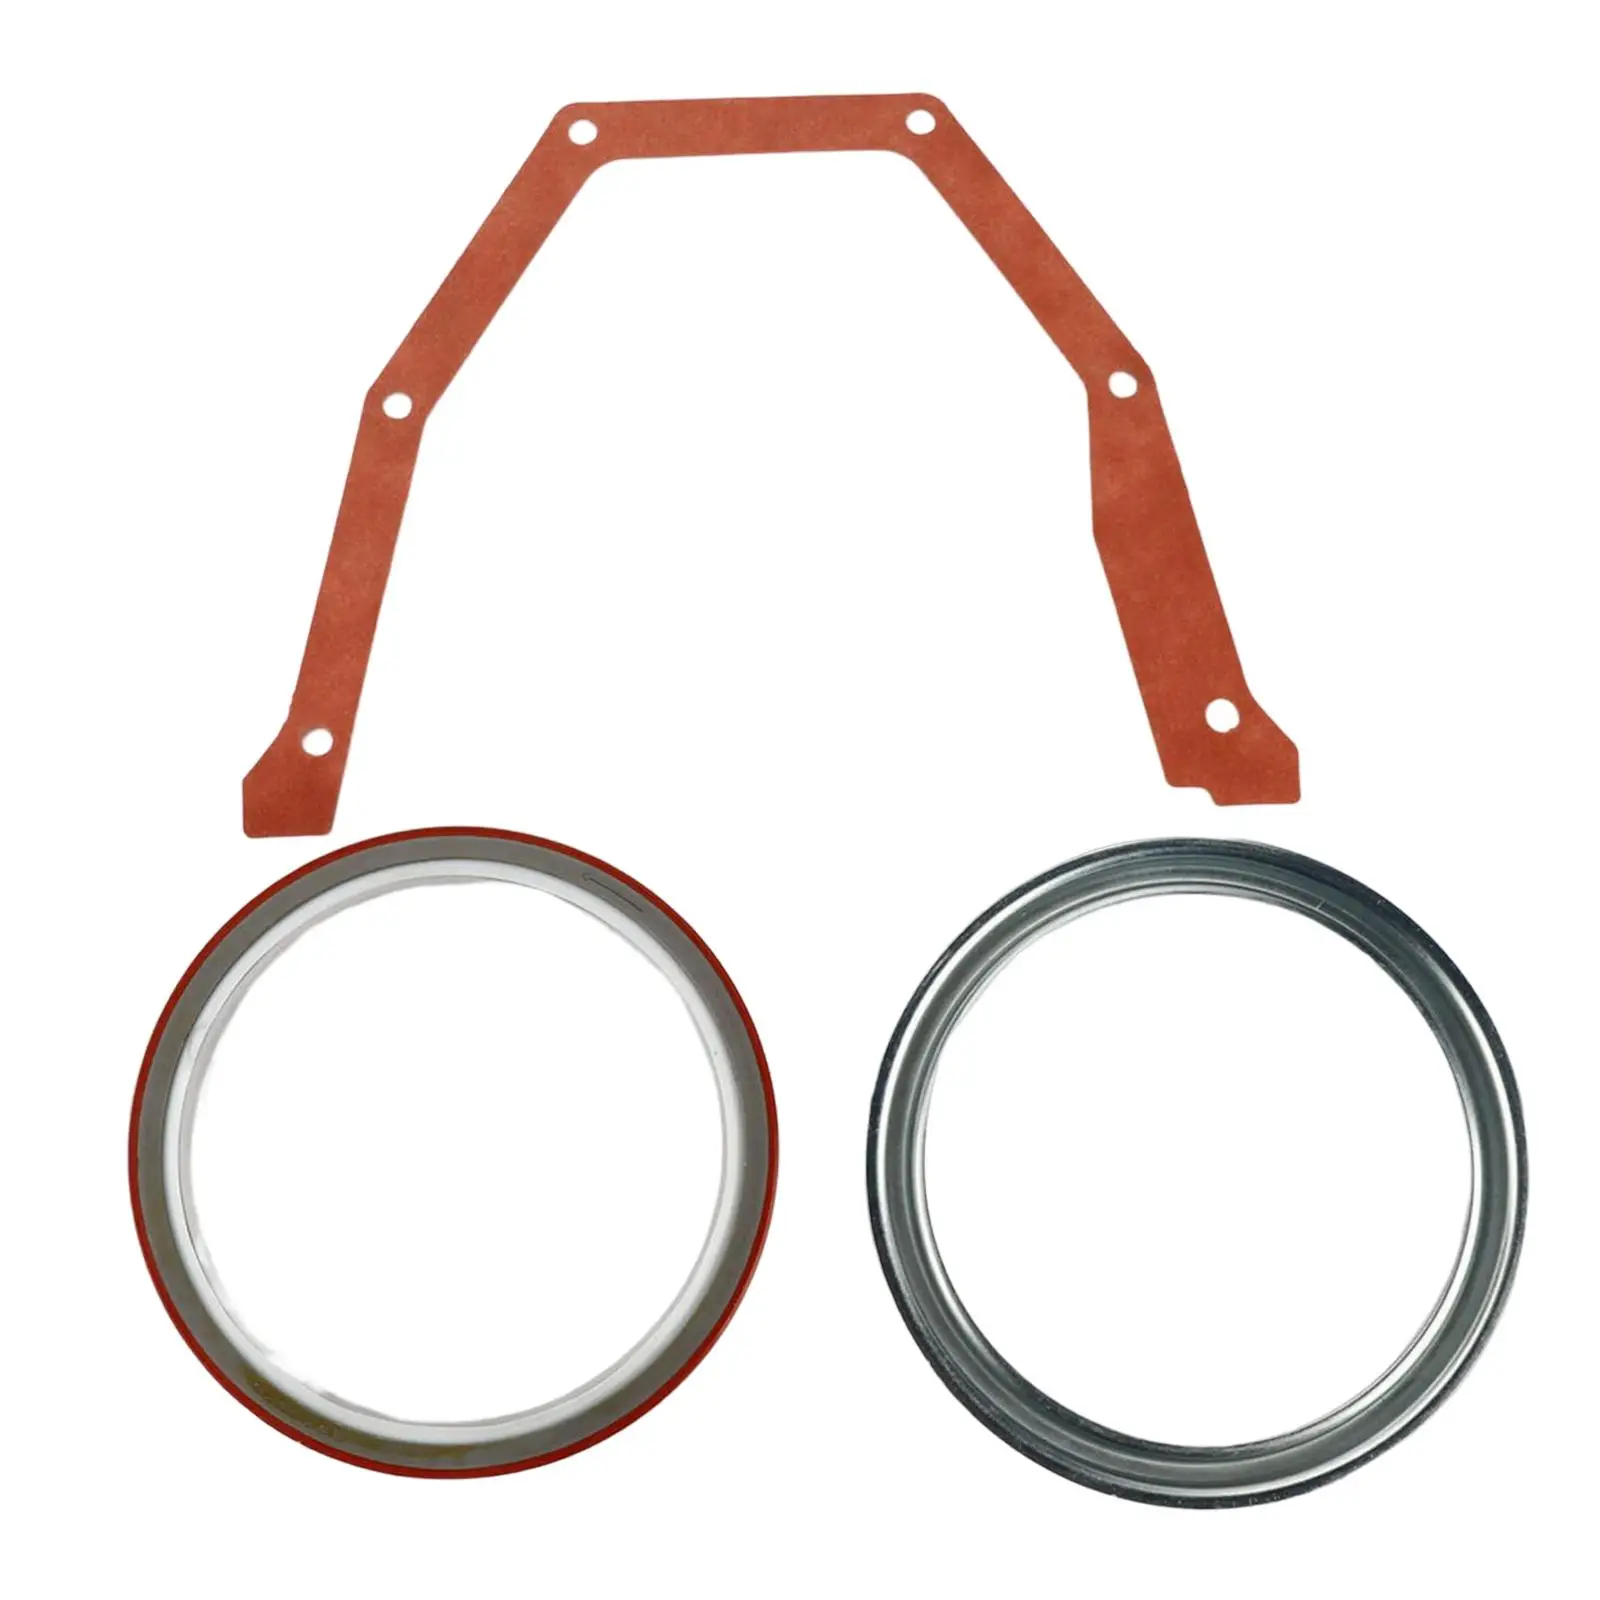 Rear Crankshaft Oil Seal 3925529 Replacement Automotive Easy to Install Premium Professional Fit for Engine 1989 and up